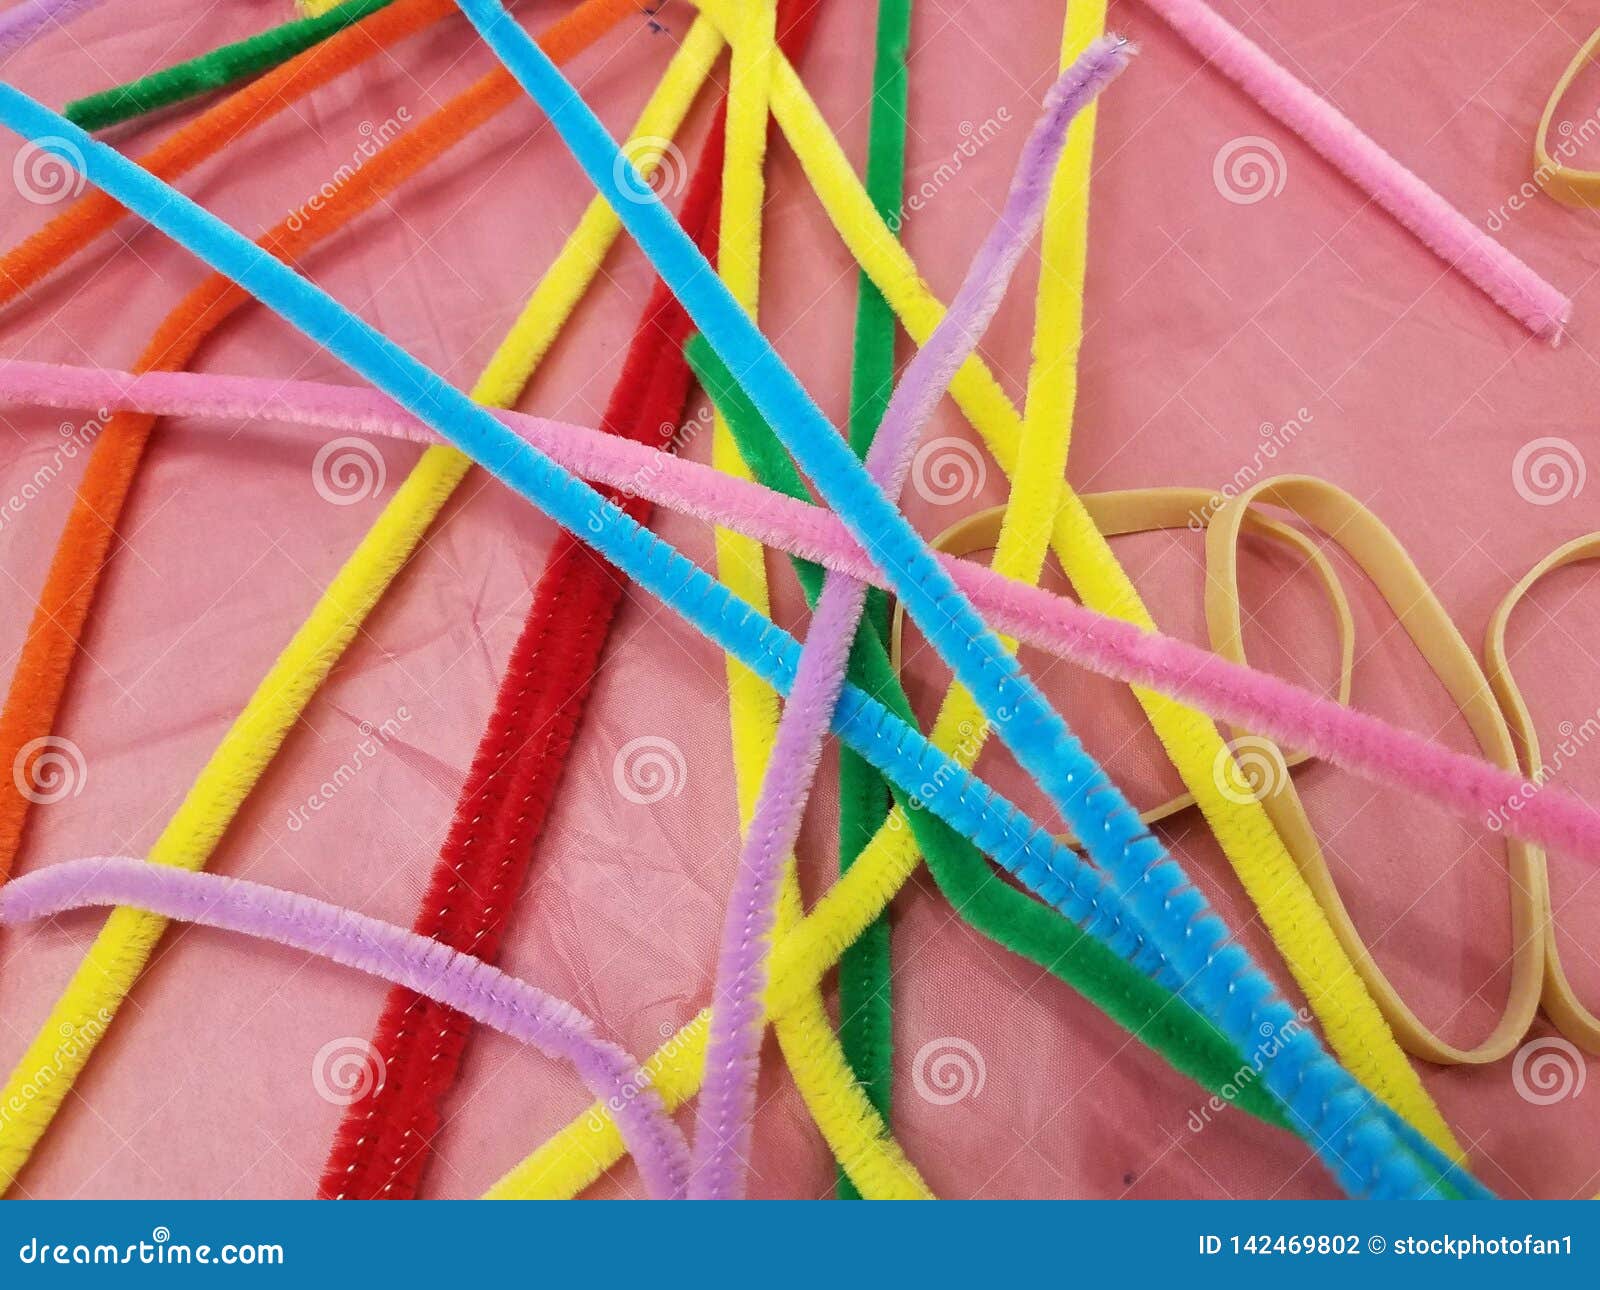 This Is A Photograph Of Pastel Colored Pipe Cleaners Stock Photo, Picture  and Royalty Free Image. Image 76691071.